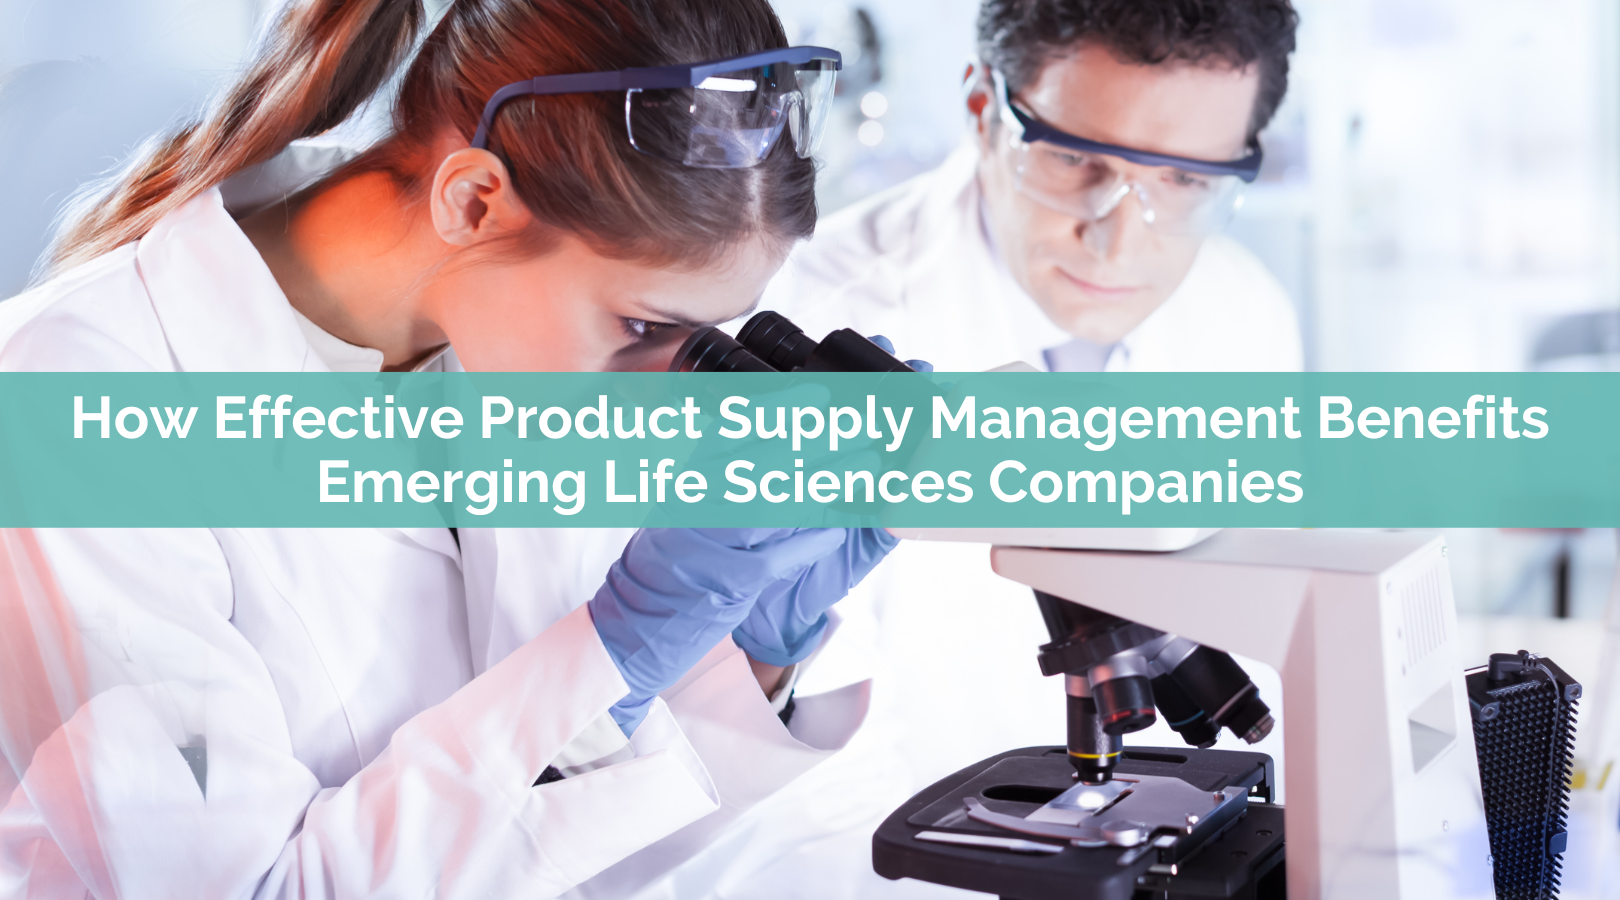 How Effective Product Supply Management Benefits Emerging Life Sciences Companies